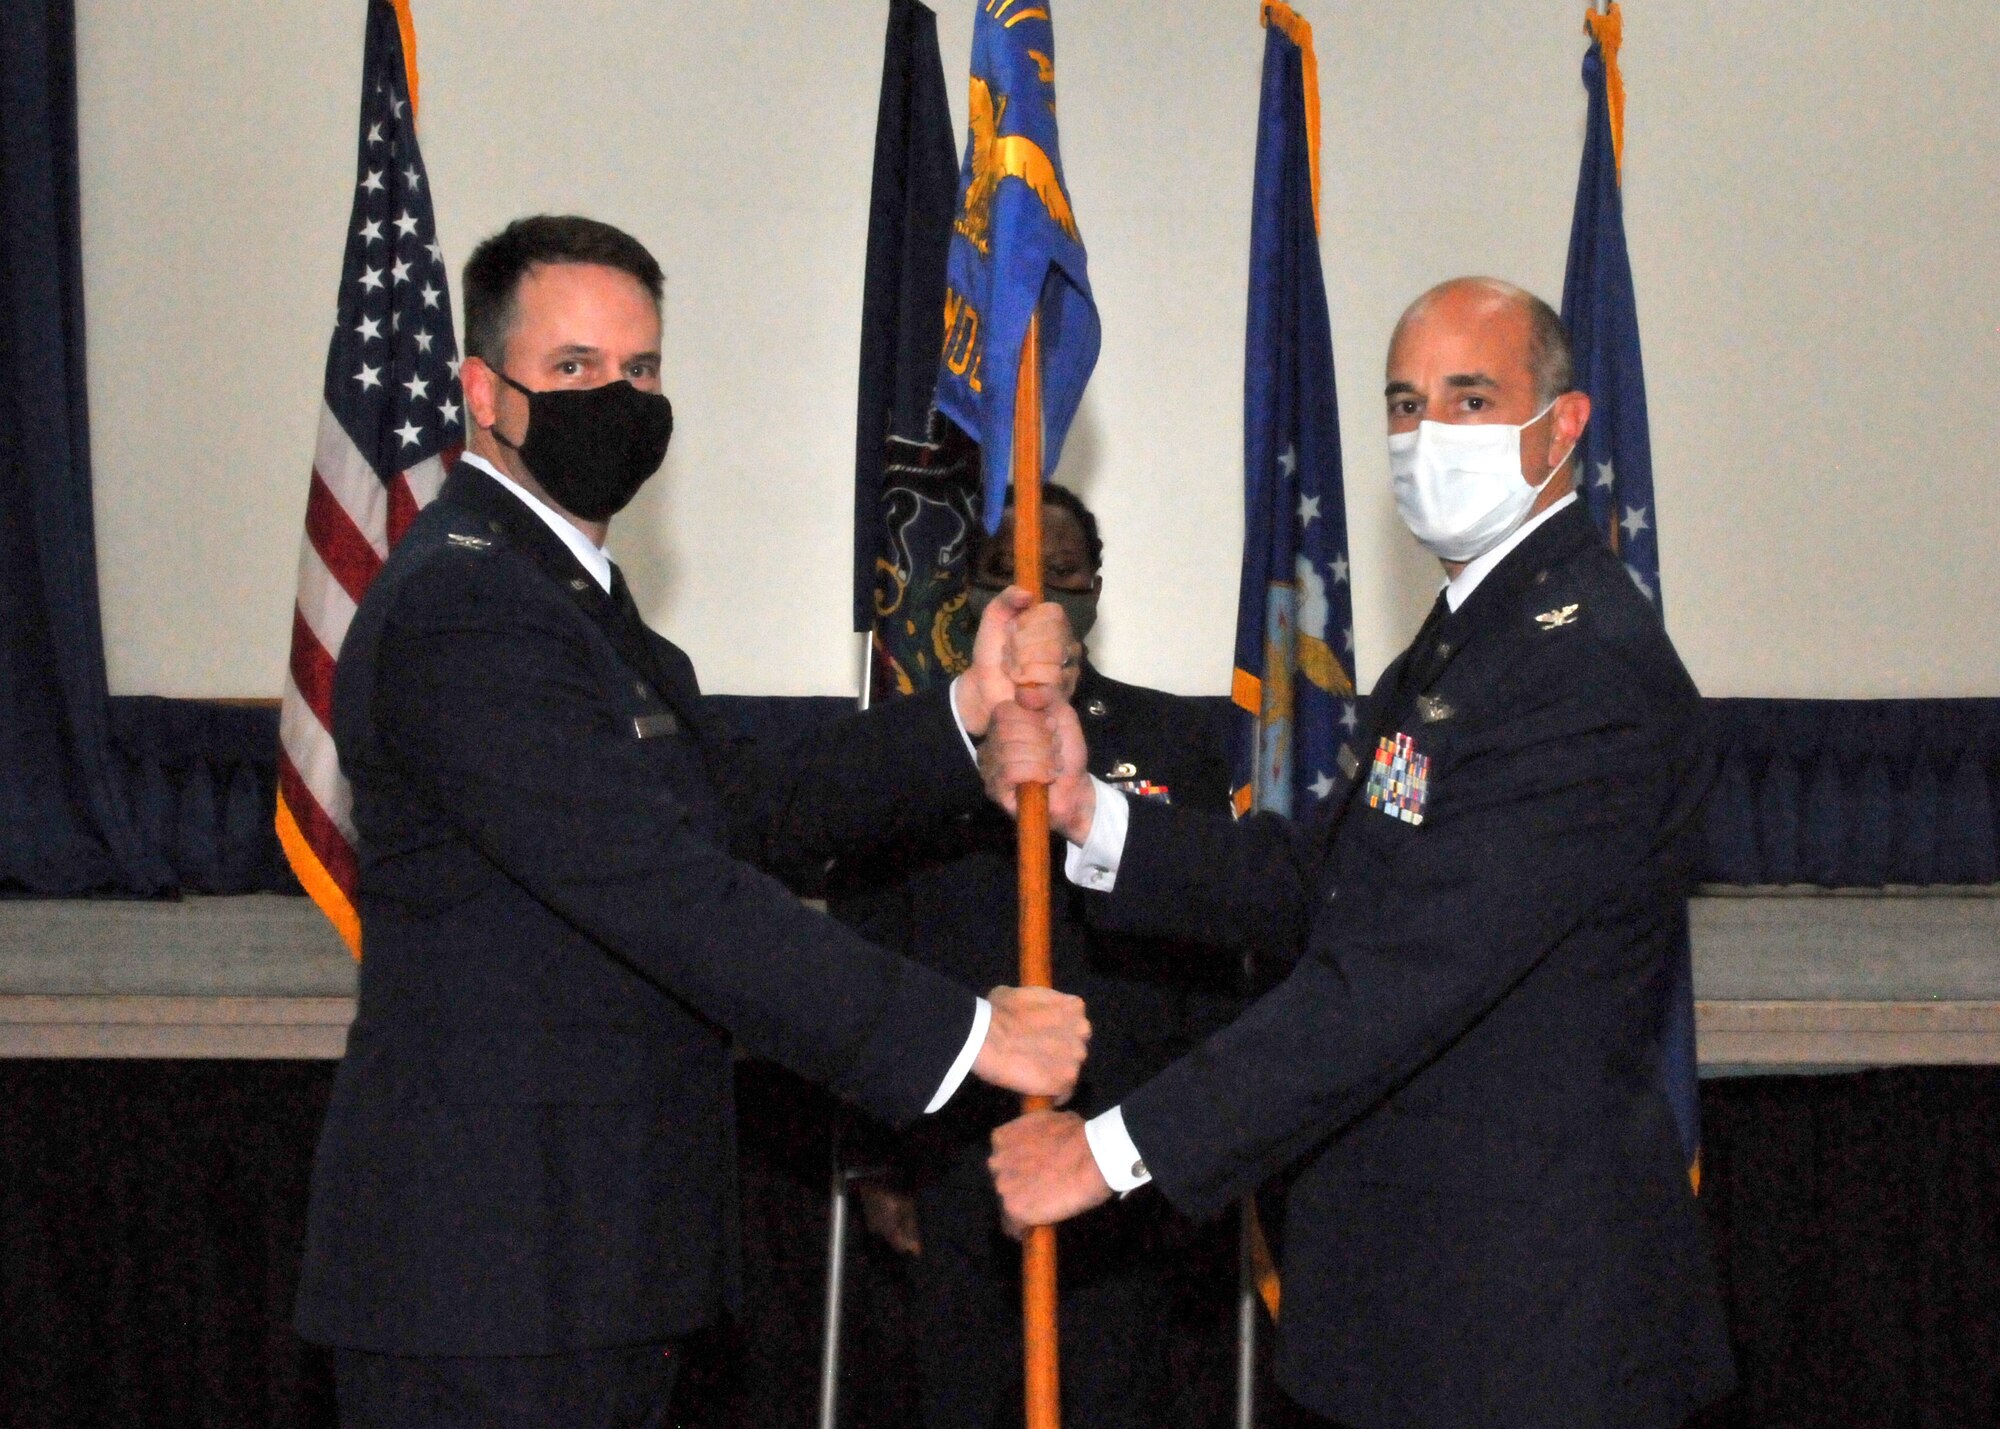 An Air Force colonel hands a guidon to a new commanding officer.